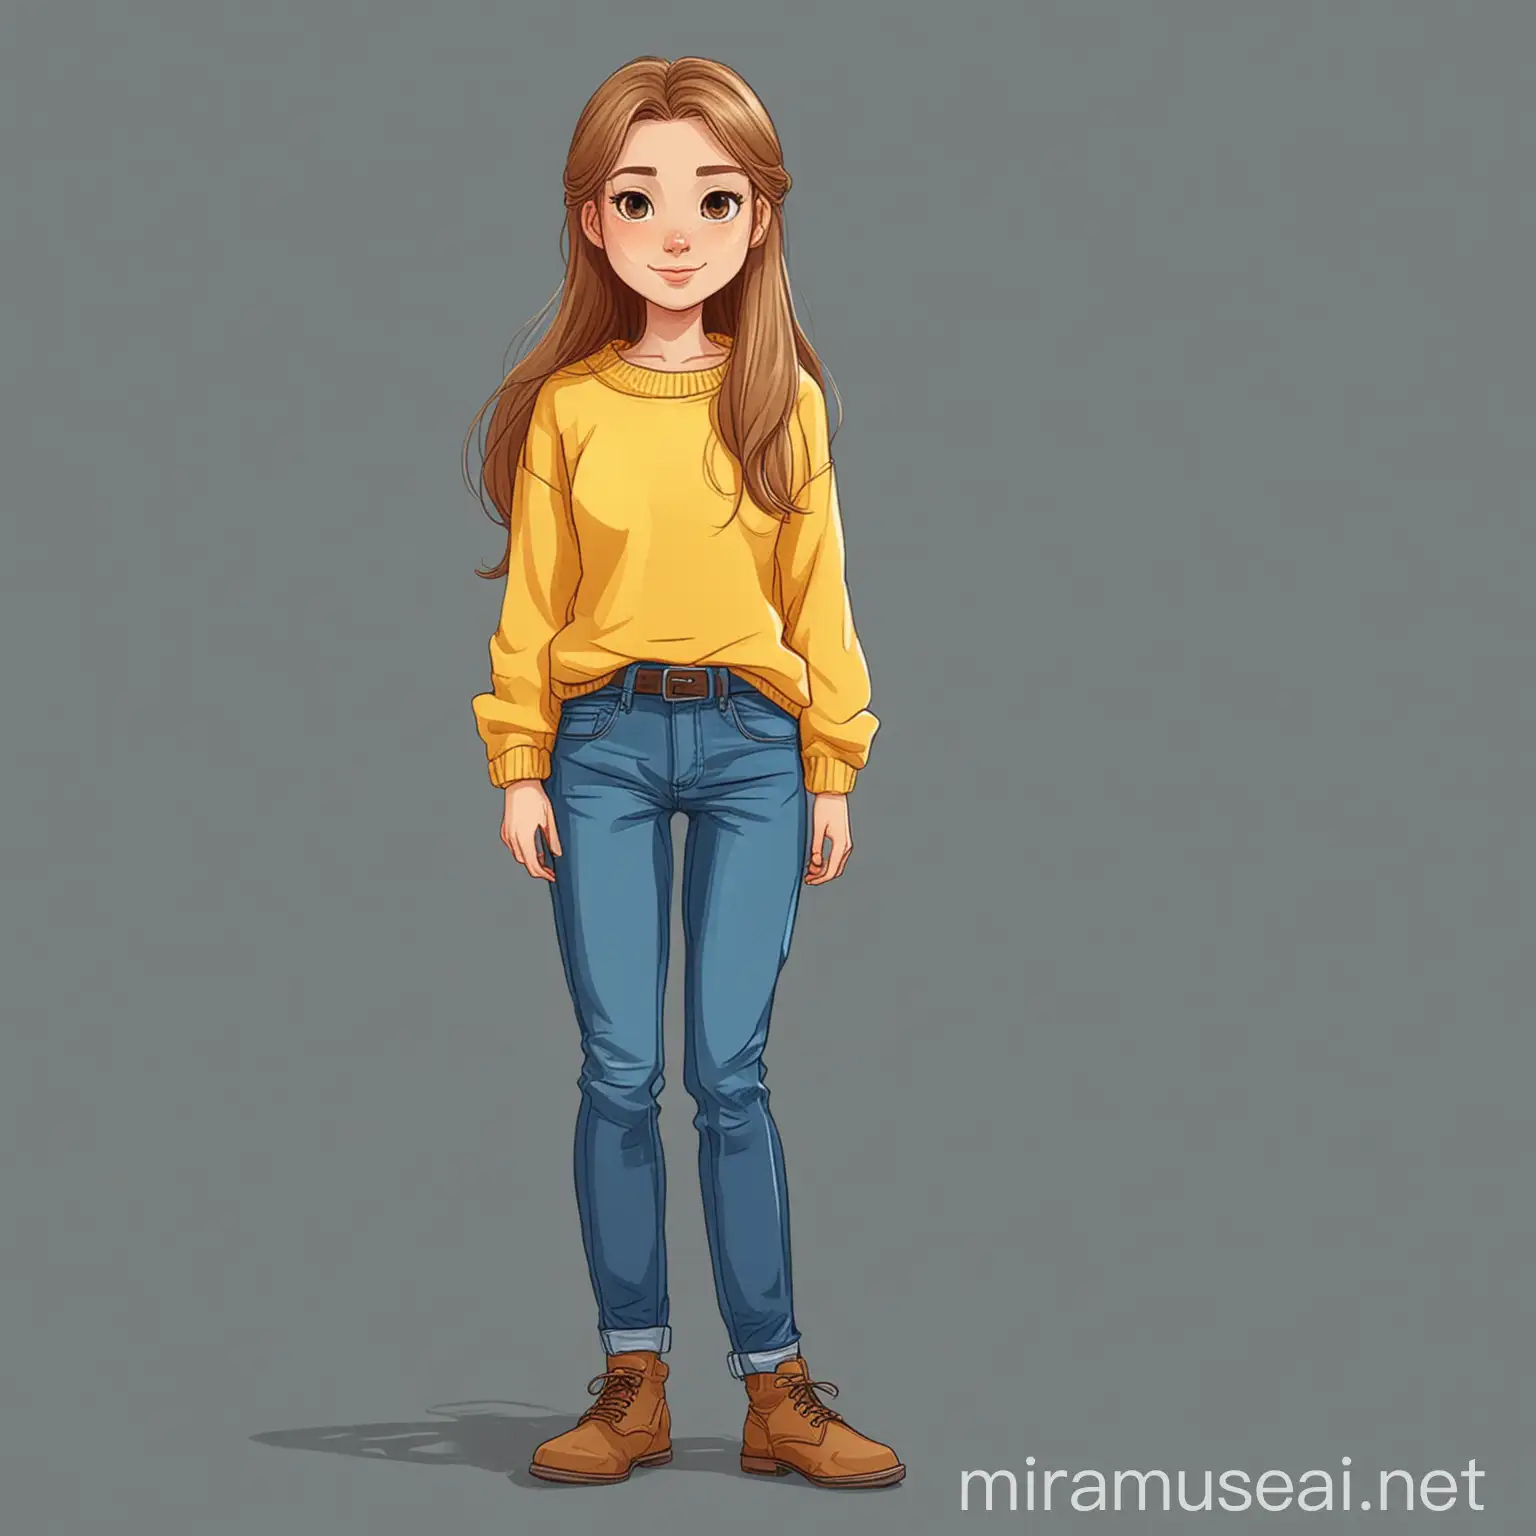 Girl in Yellow Sweater with Long Hair and Blue Jeans Flat Vector Character Design